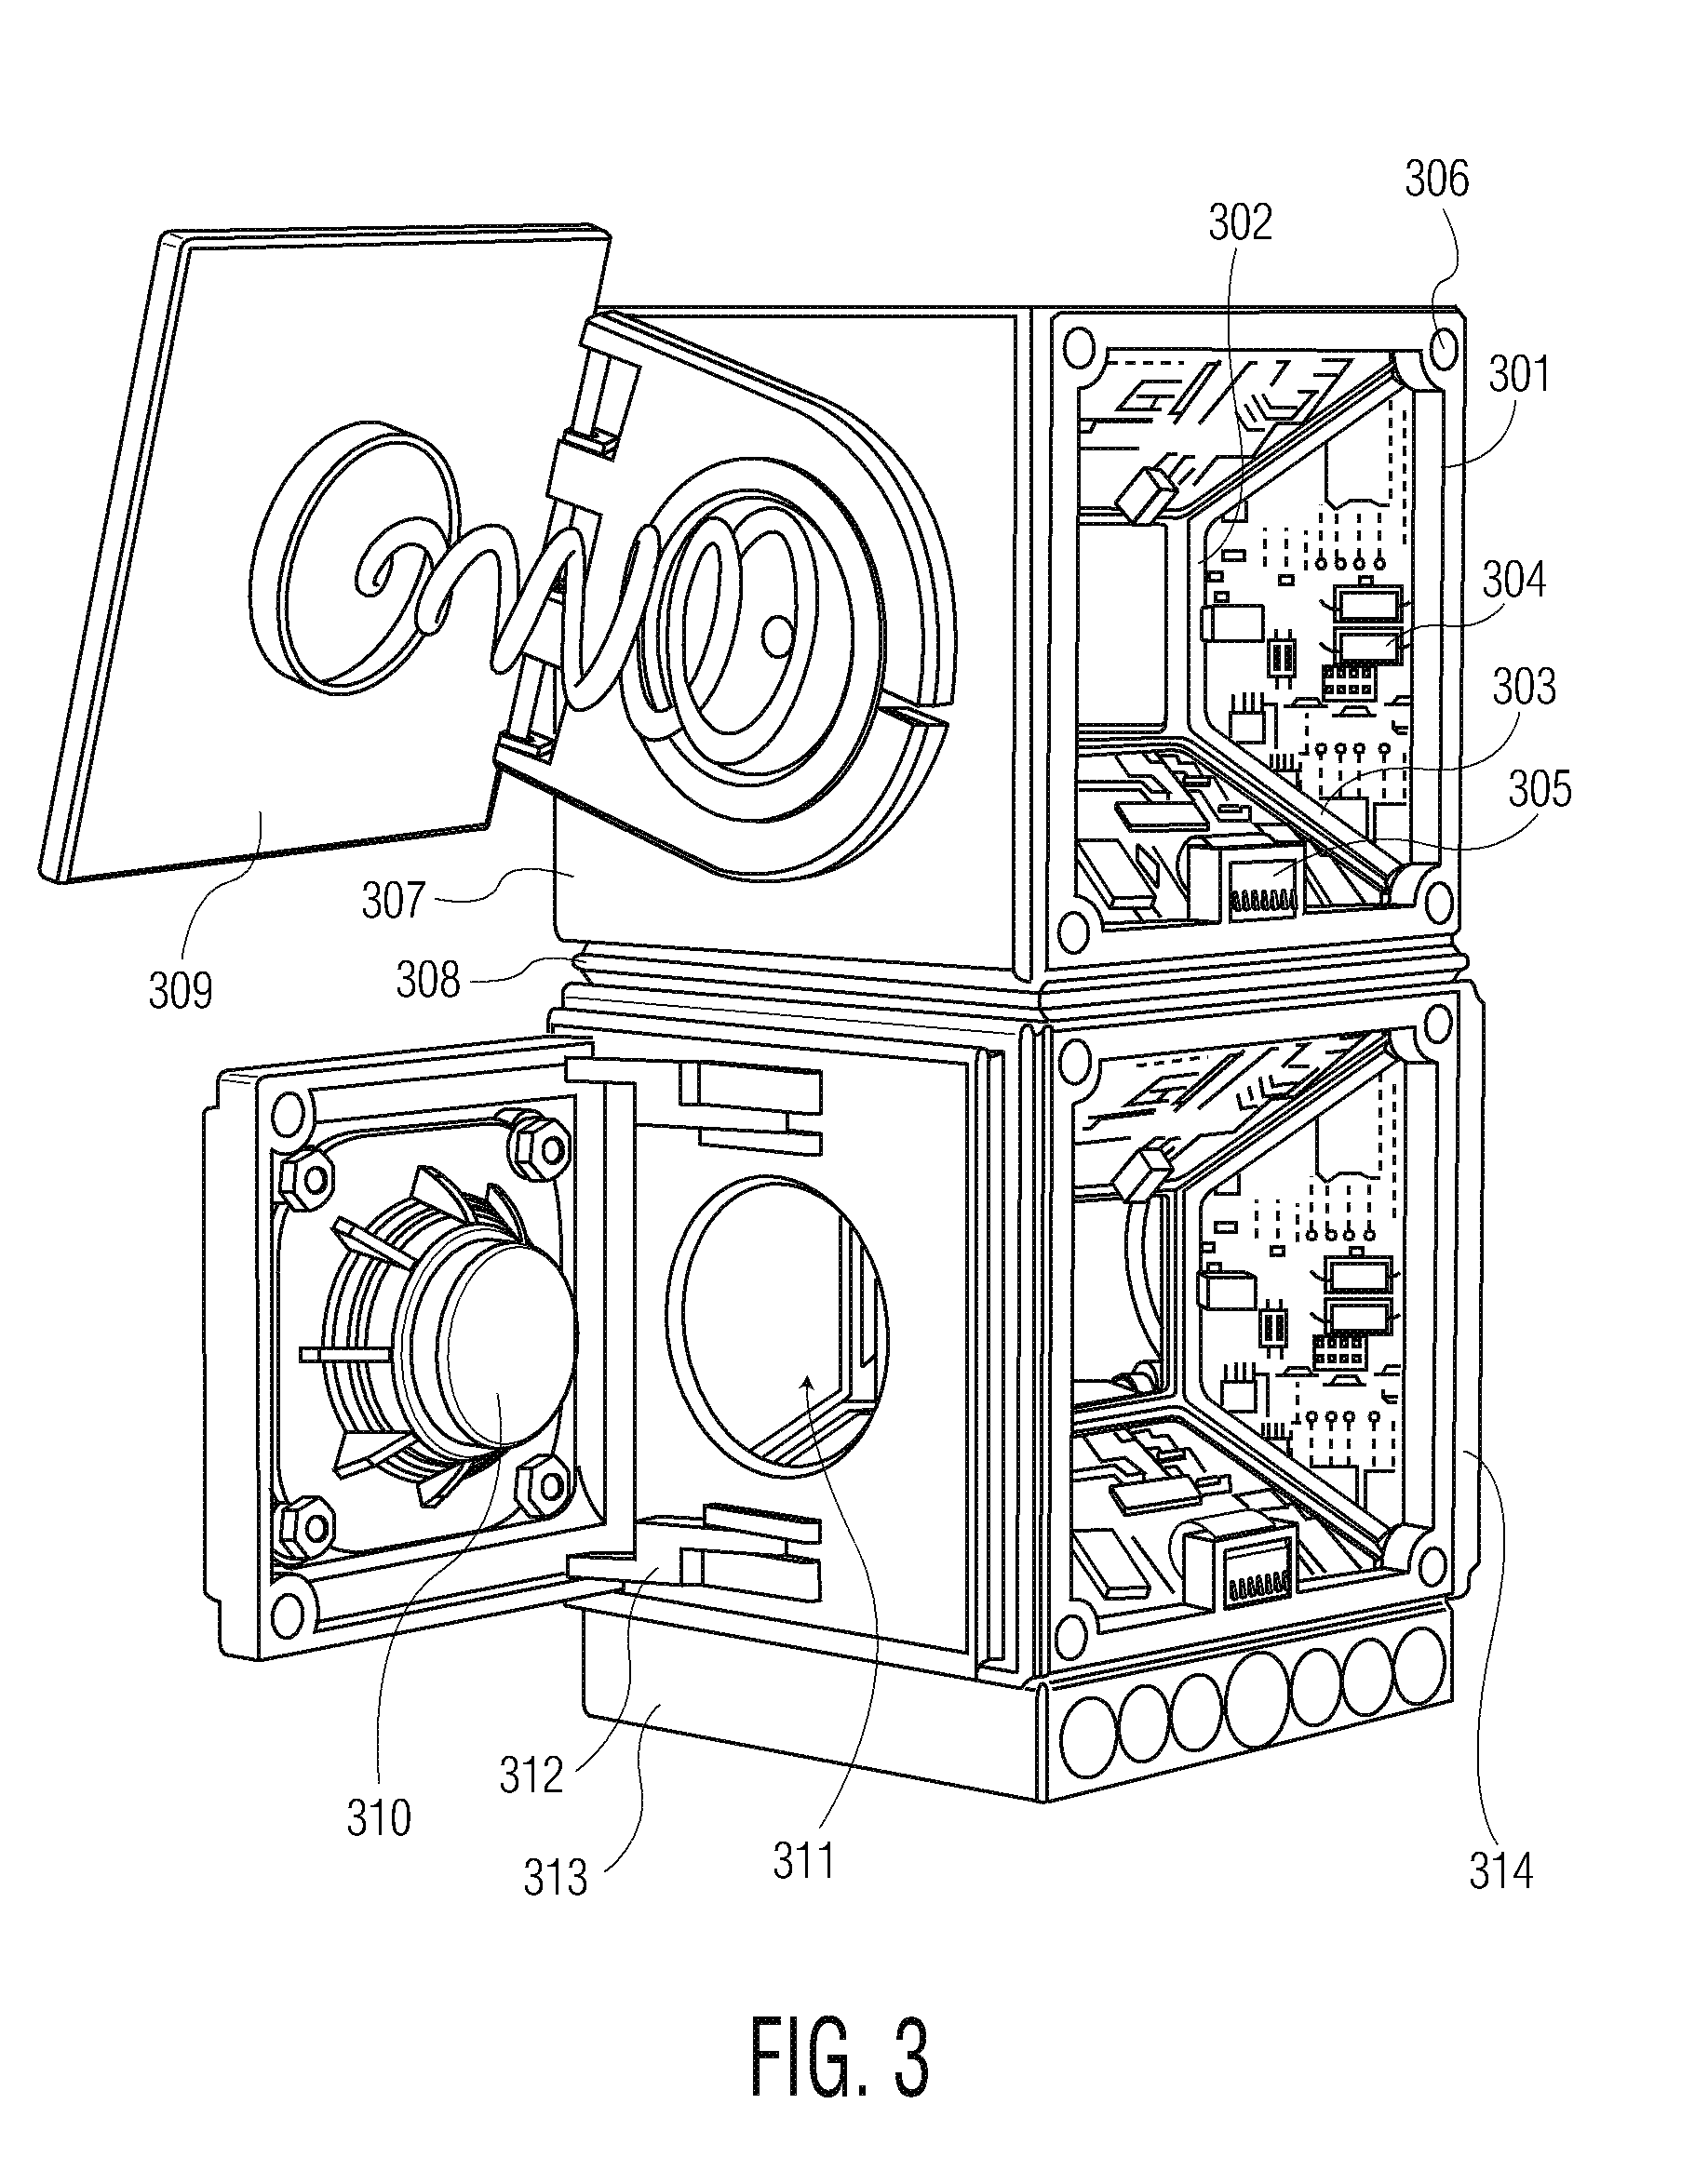 Modular quick-connect a/v system and methods thereof